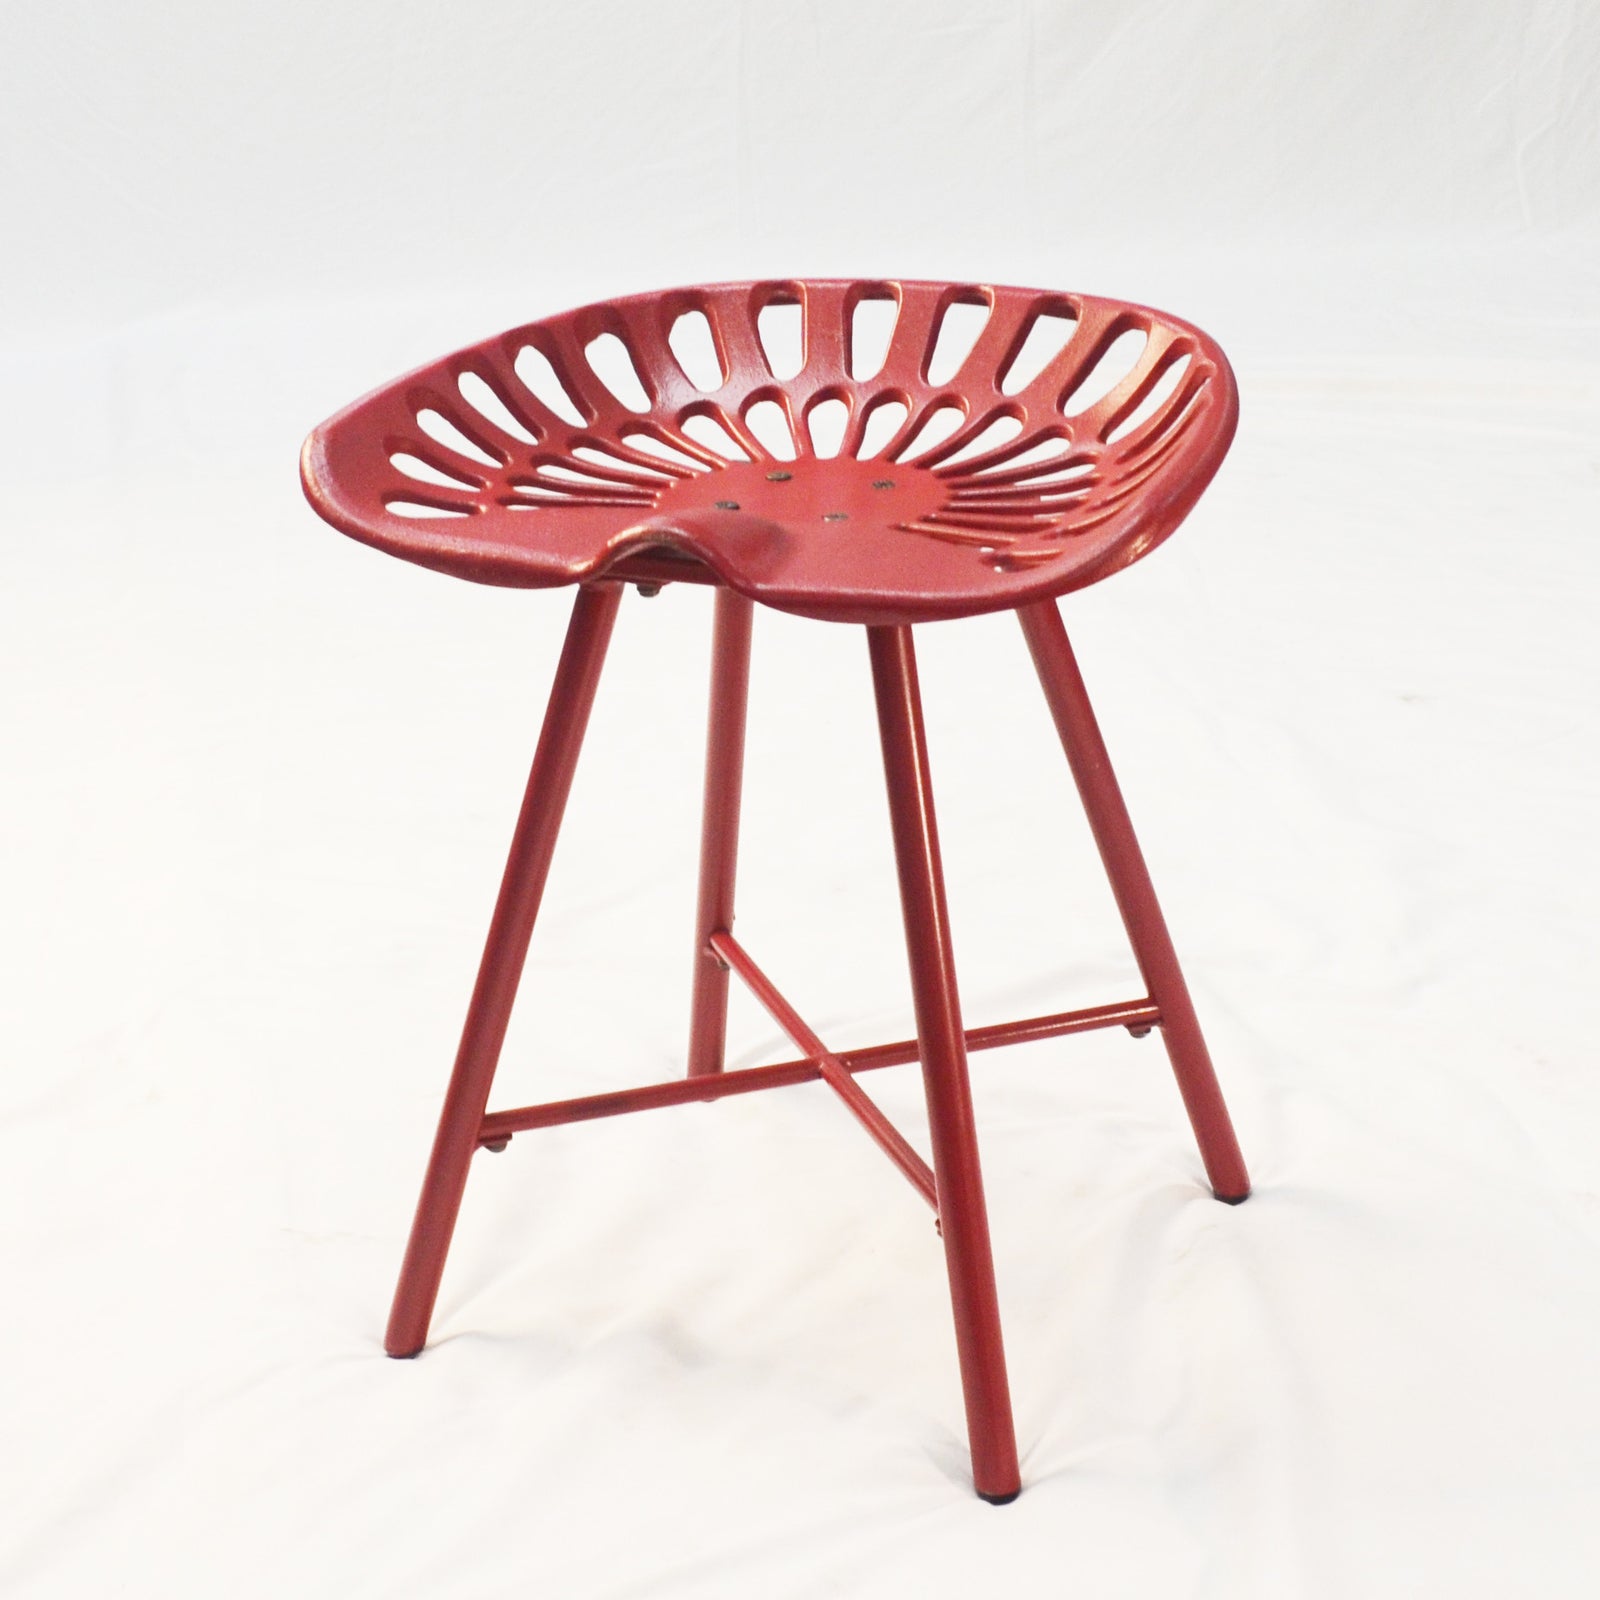 18" Red Metal Backless Stool